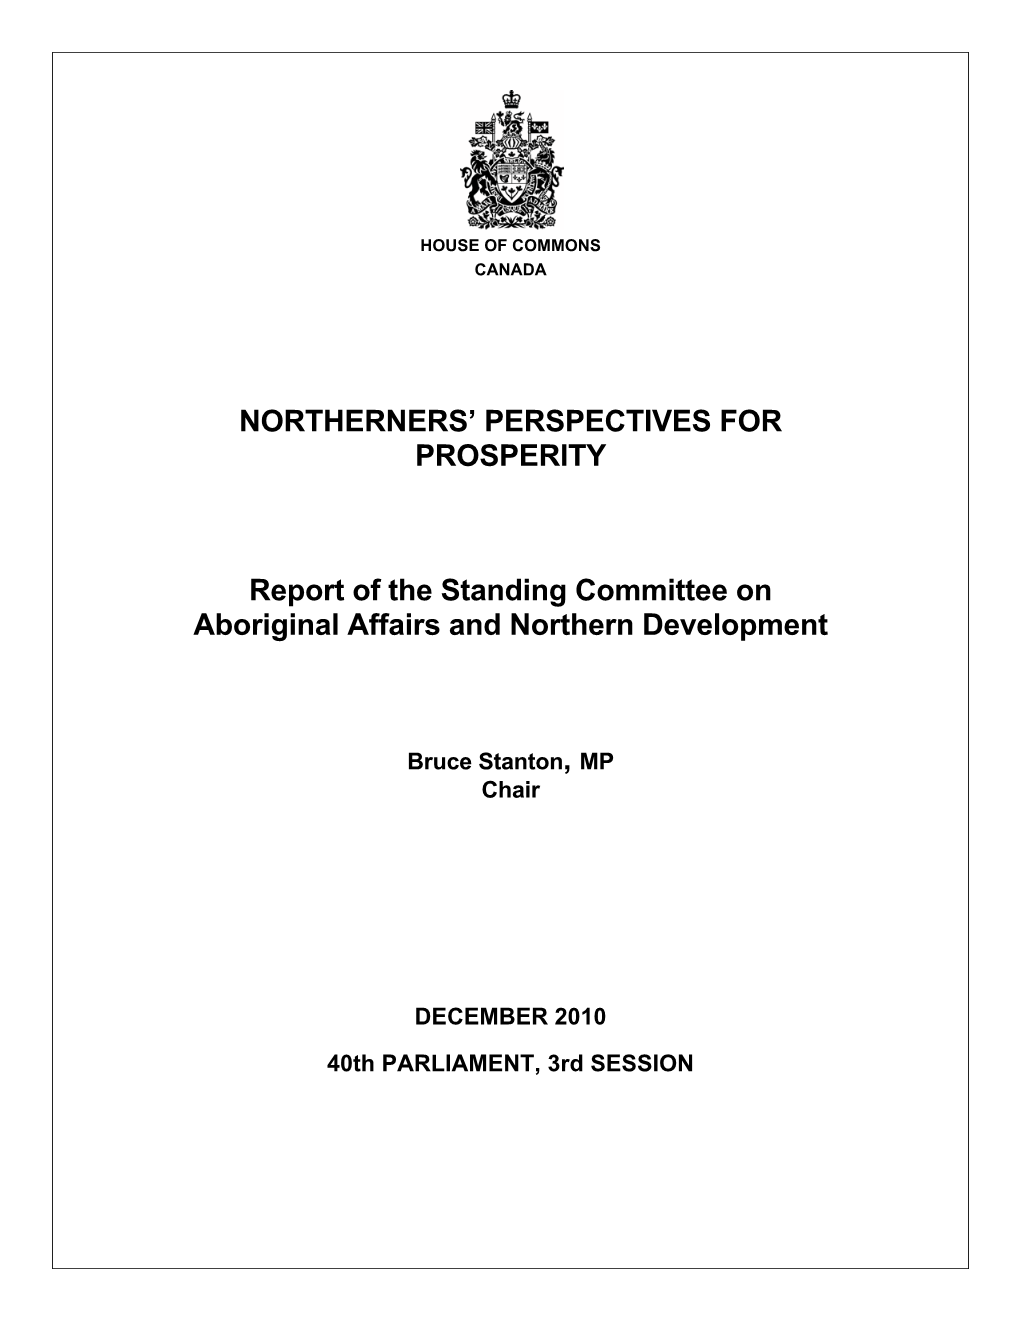 Report of the Standing Committee on Aboriginal Affairs and Northern Development